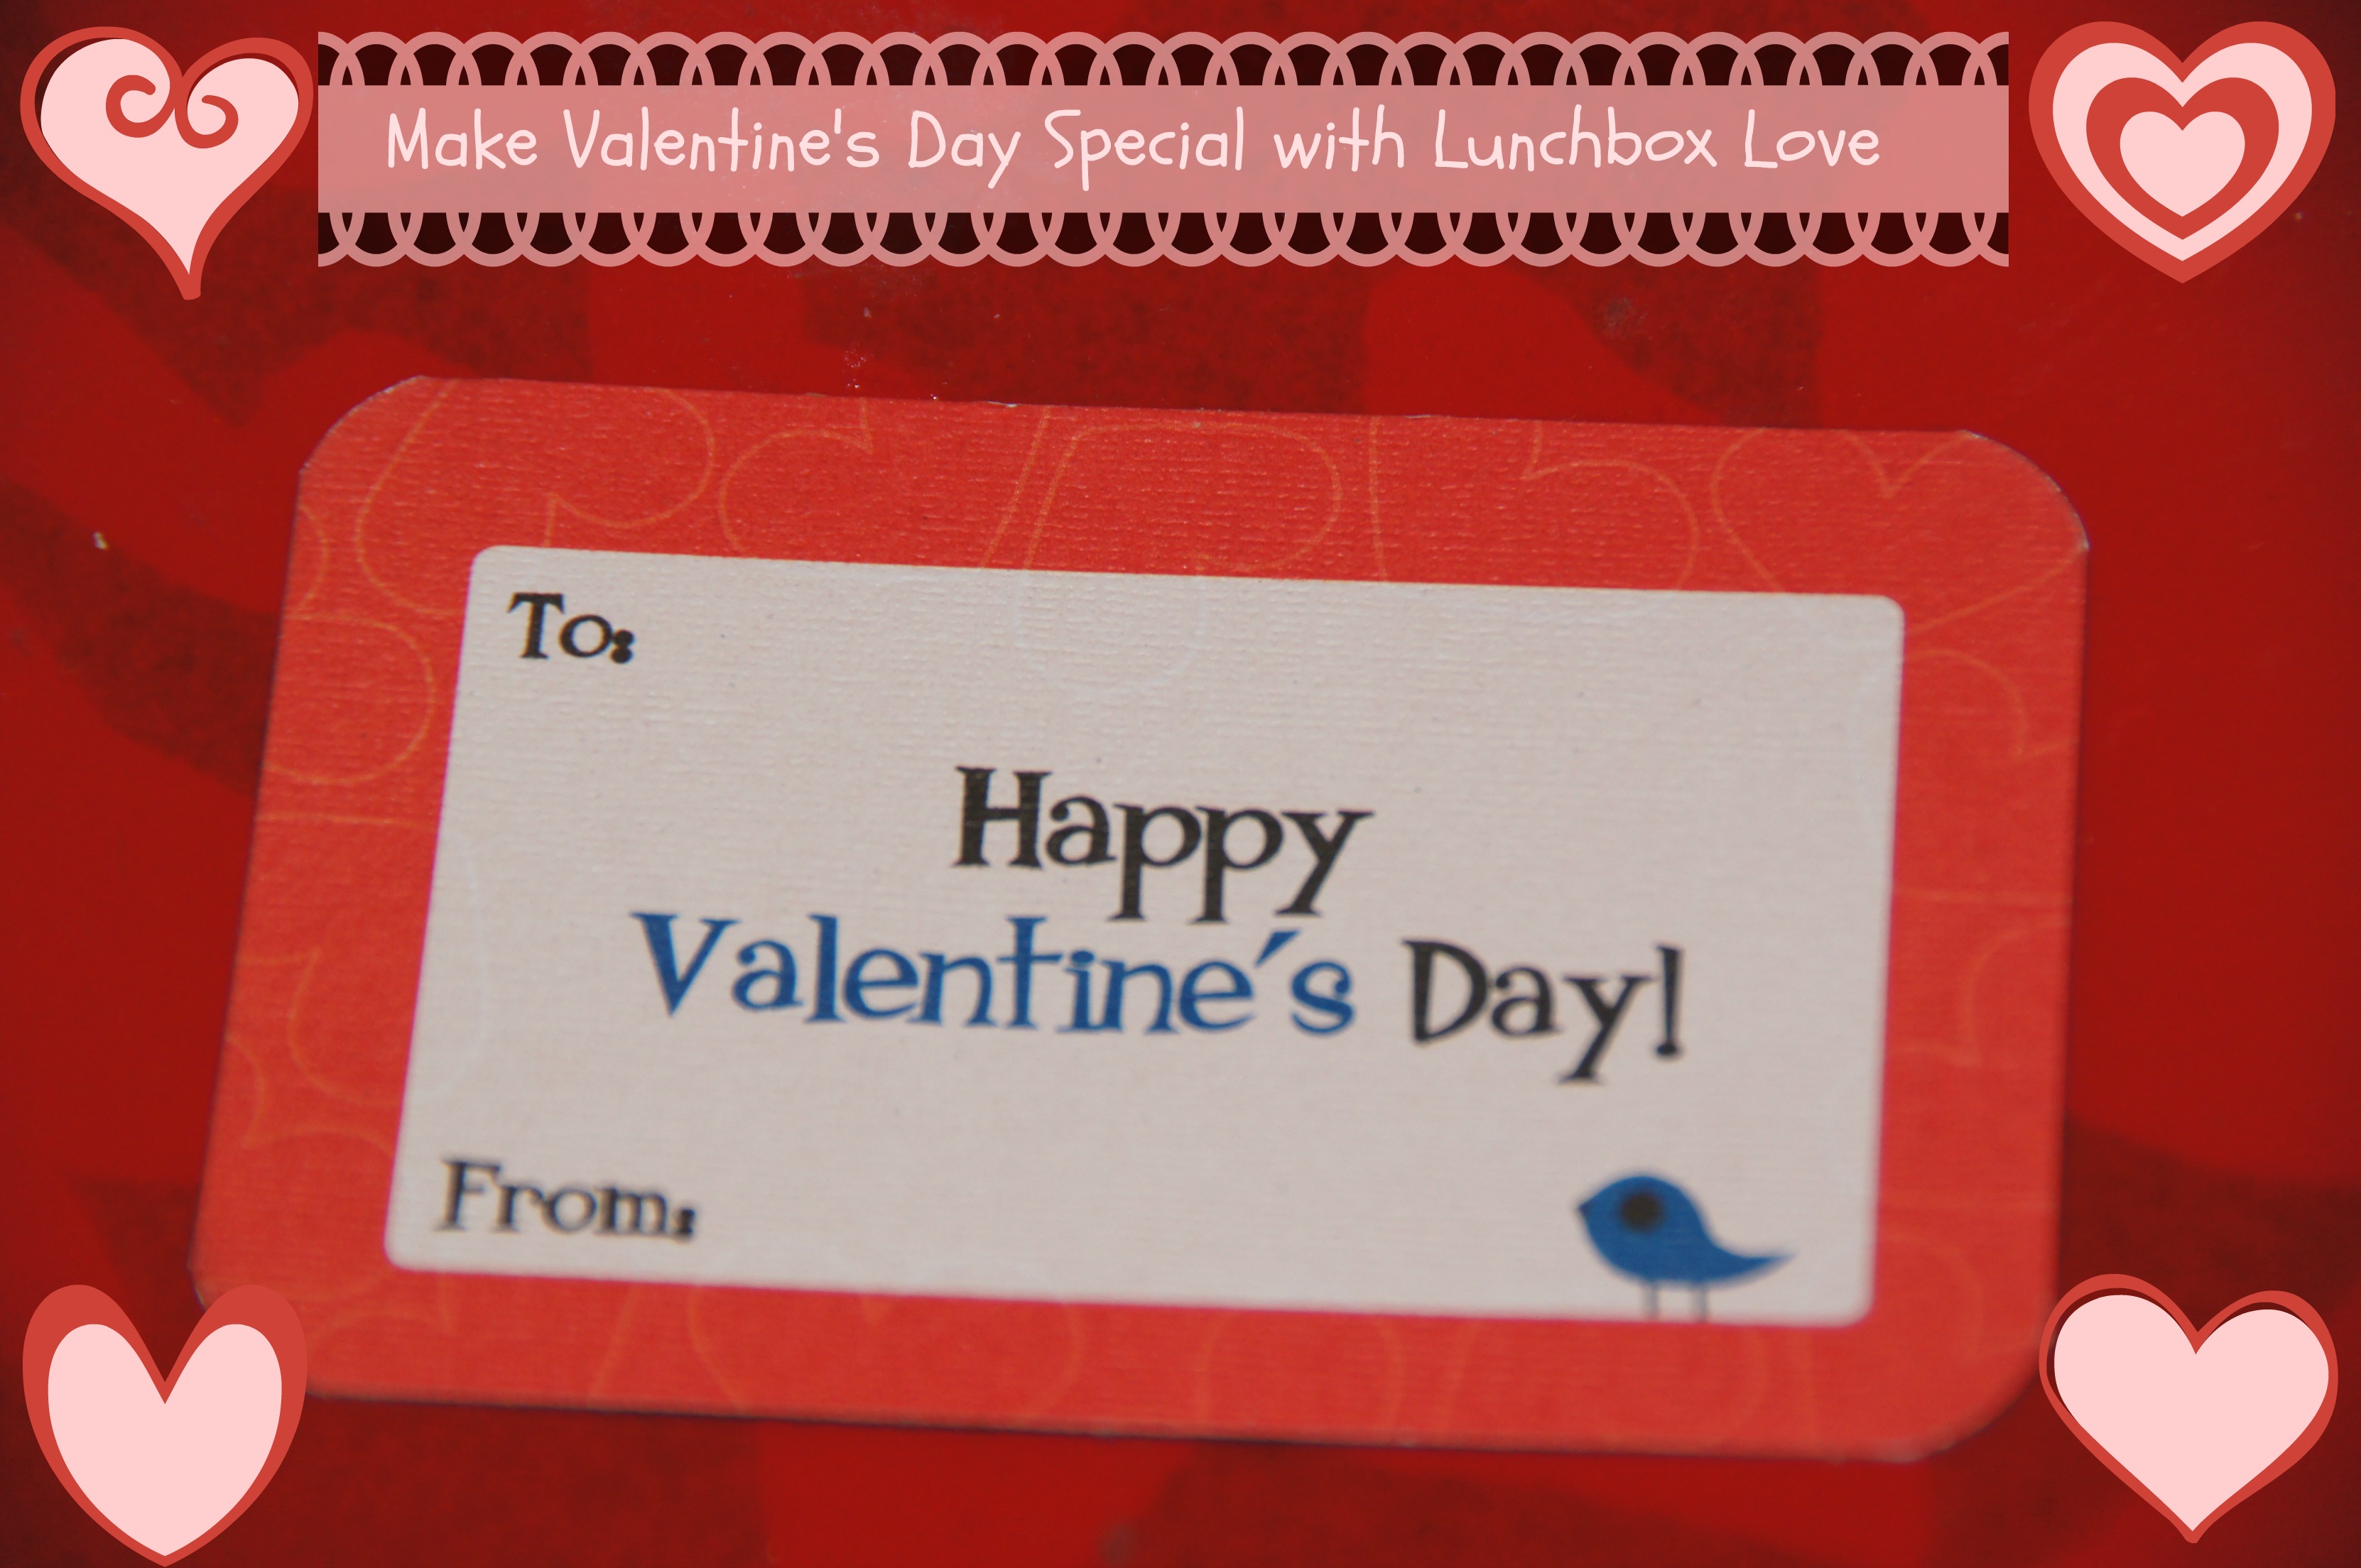 Make Valentine’s Day Special With Lunchbox Love